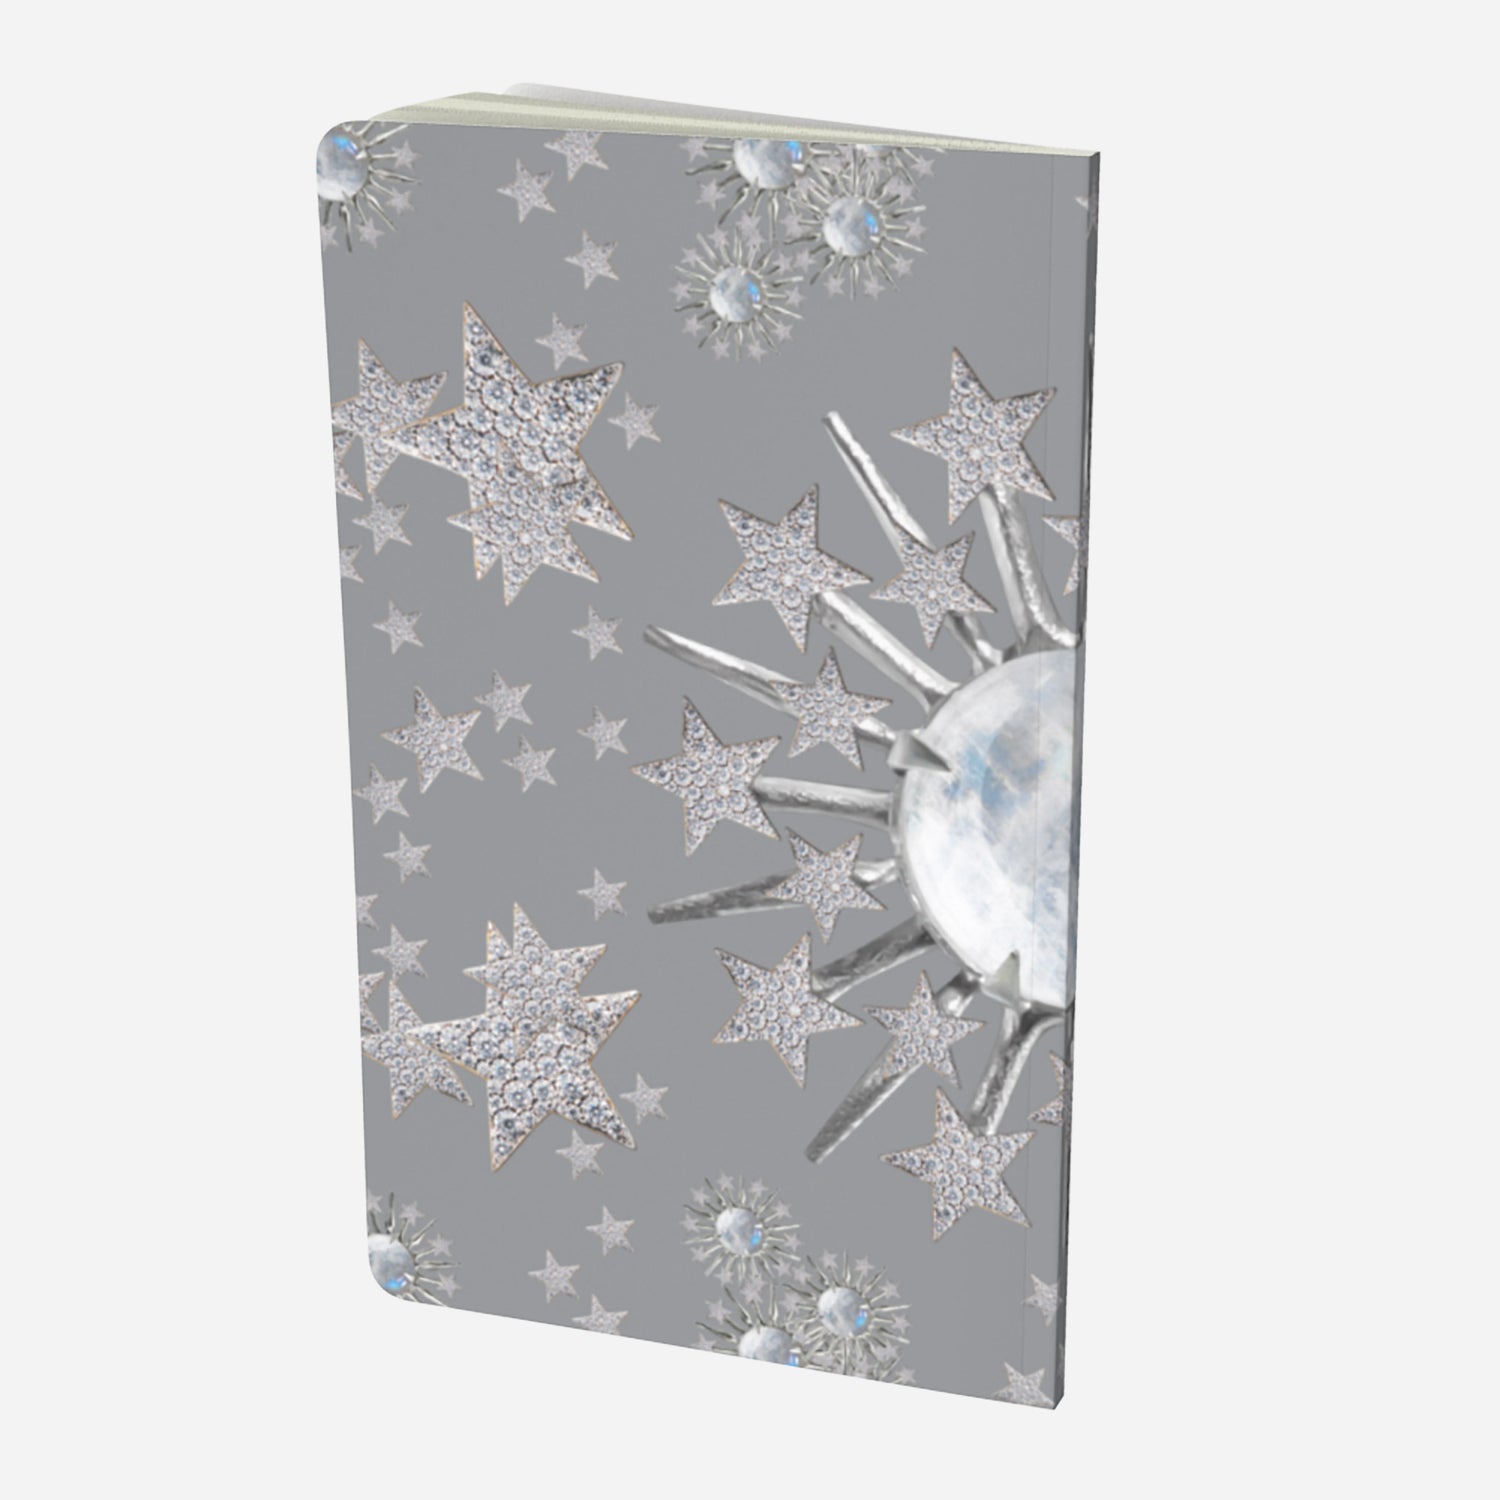 back cover of small notebook with celestial moonstone and stars design on a grey background